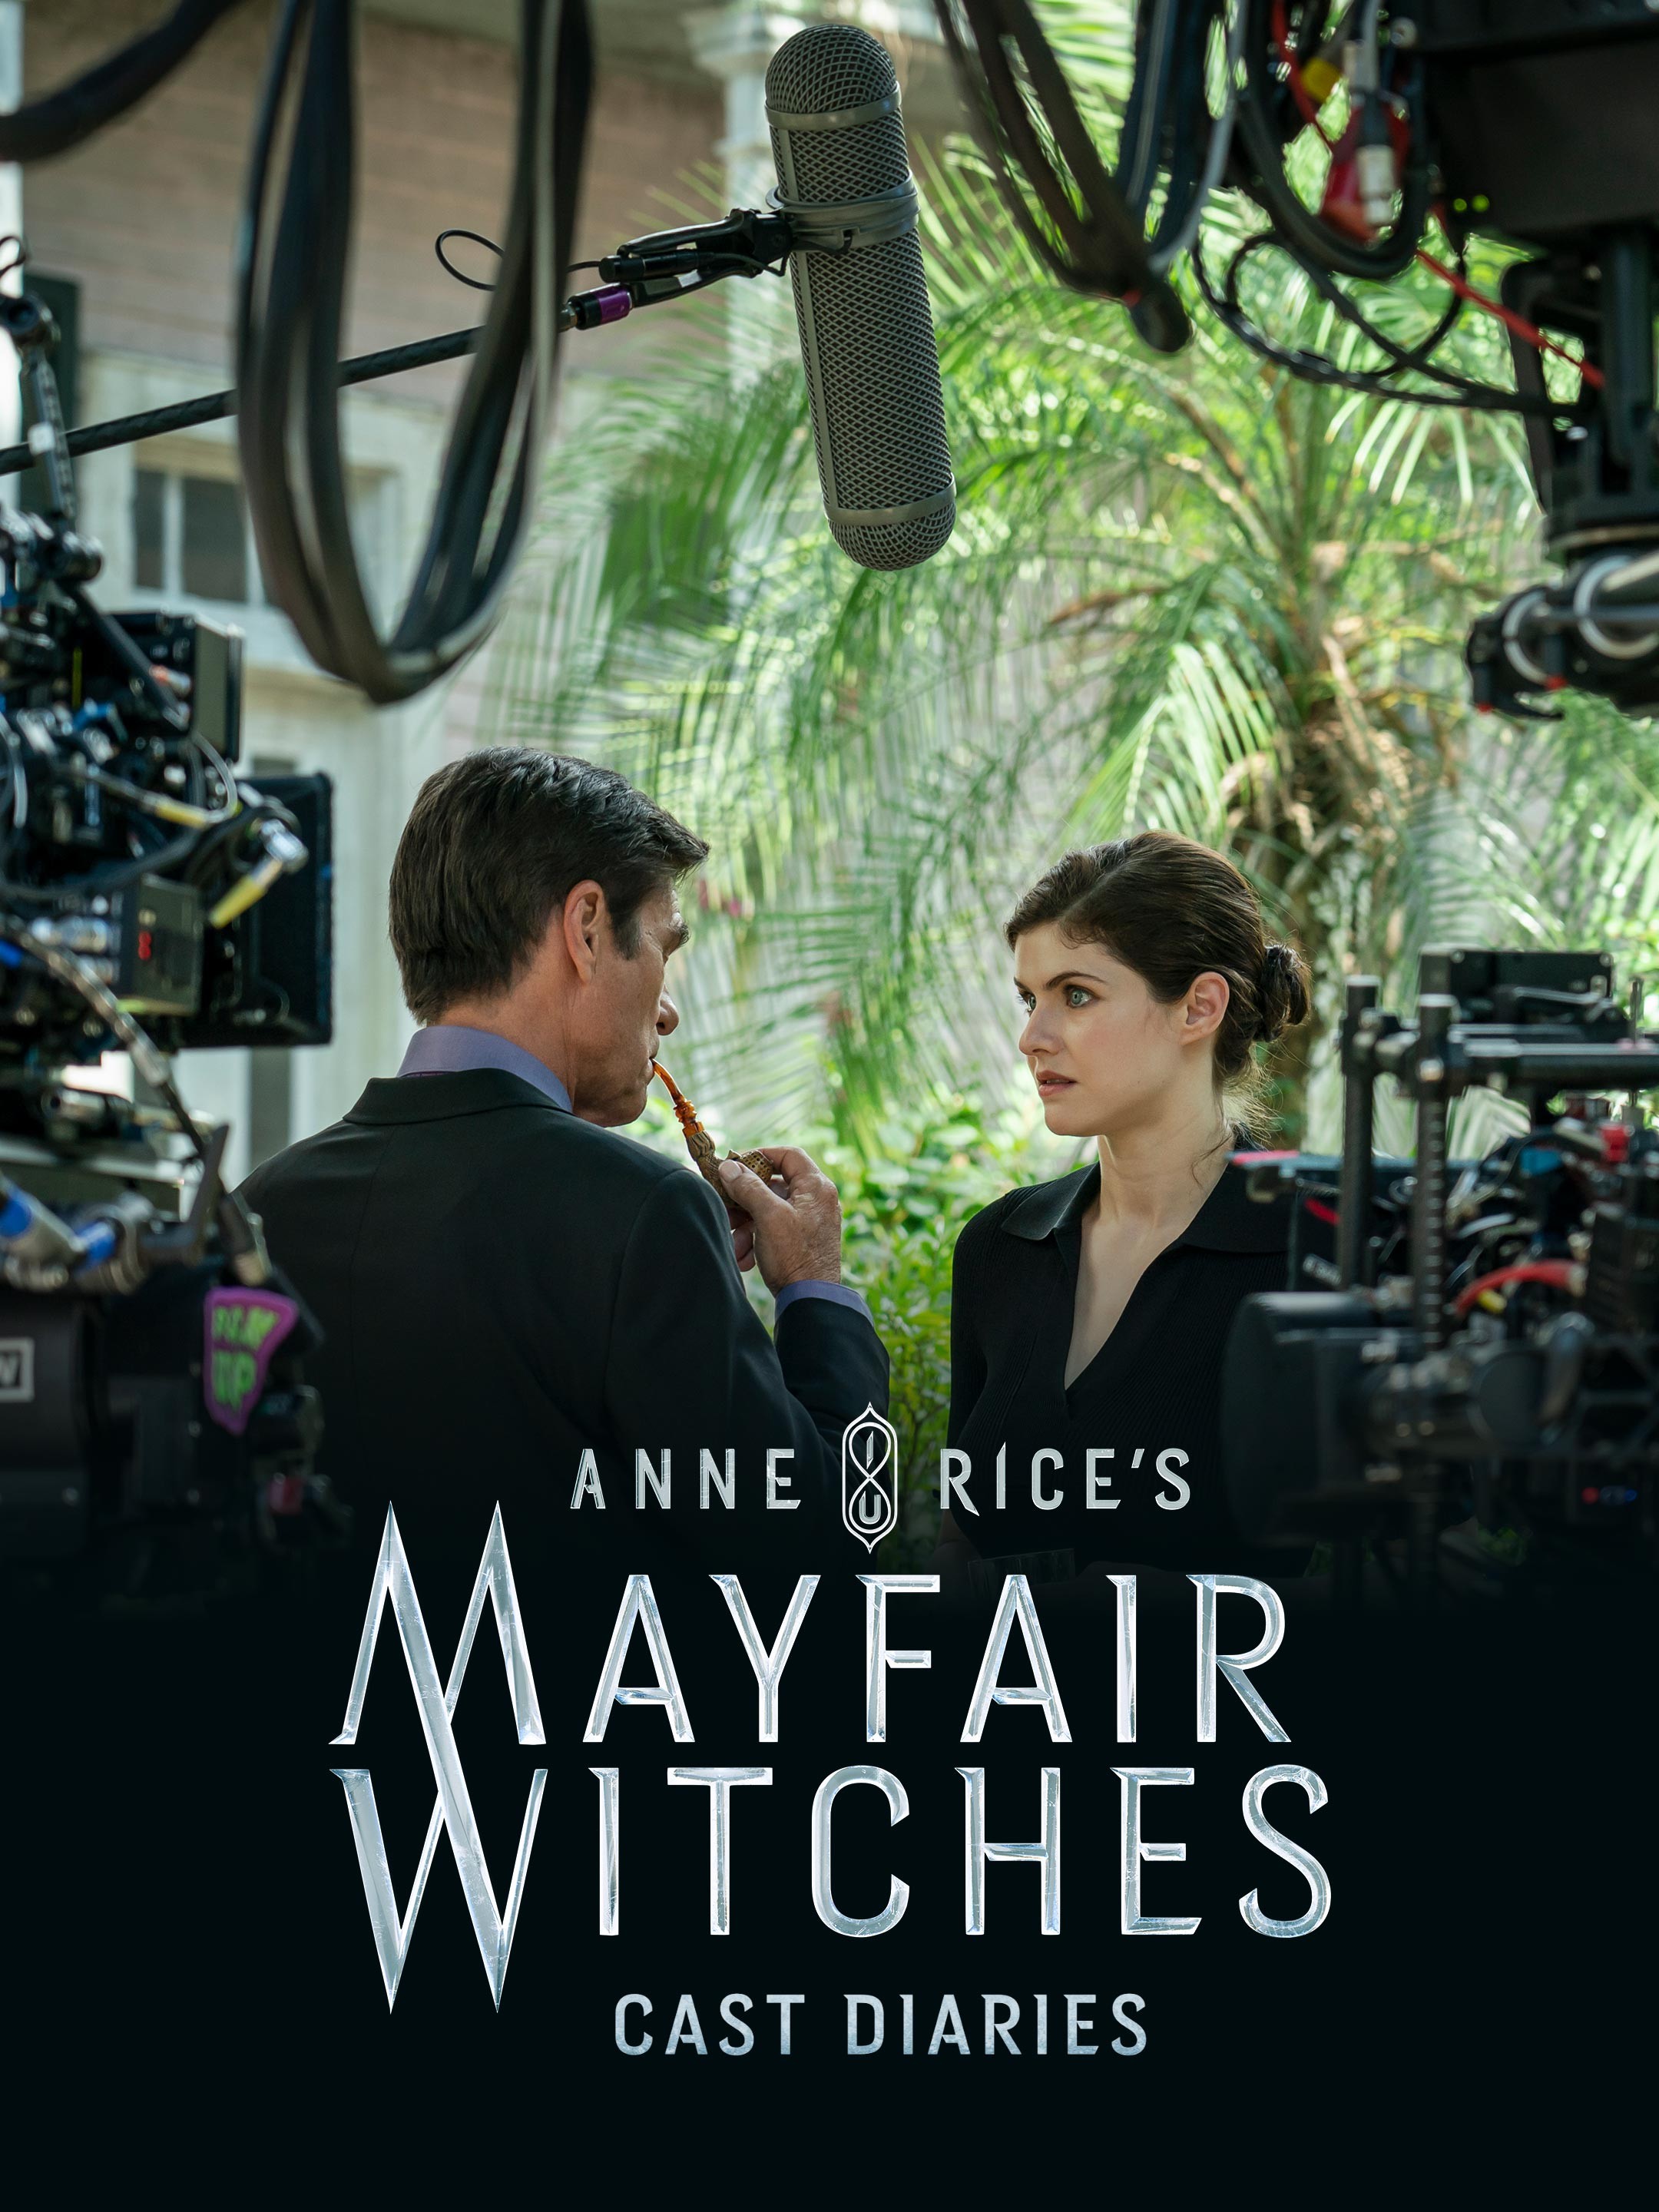 Watch Anne Rice's Mayfair Witches Online | Now Streaming on OSN+ Yemen